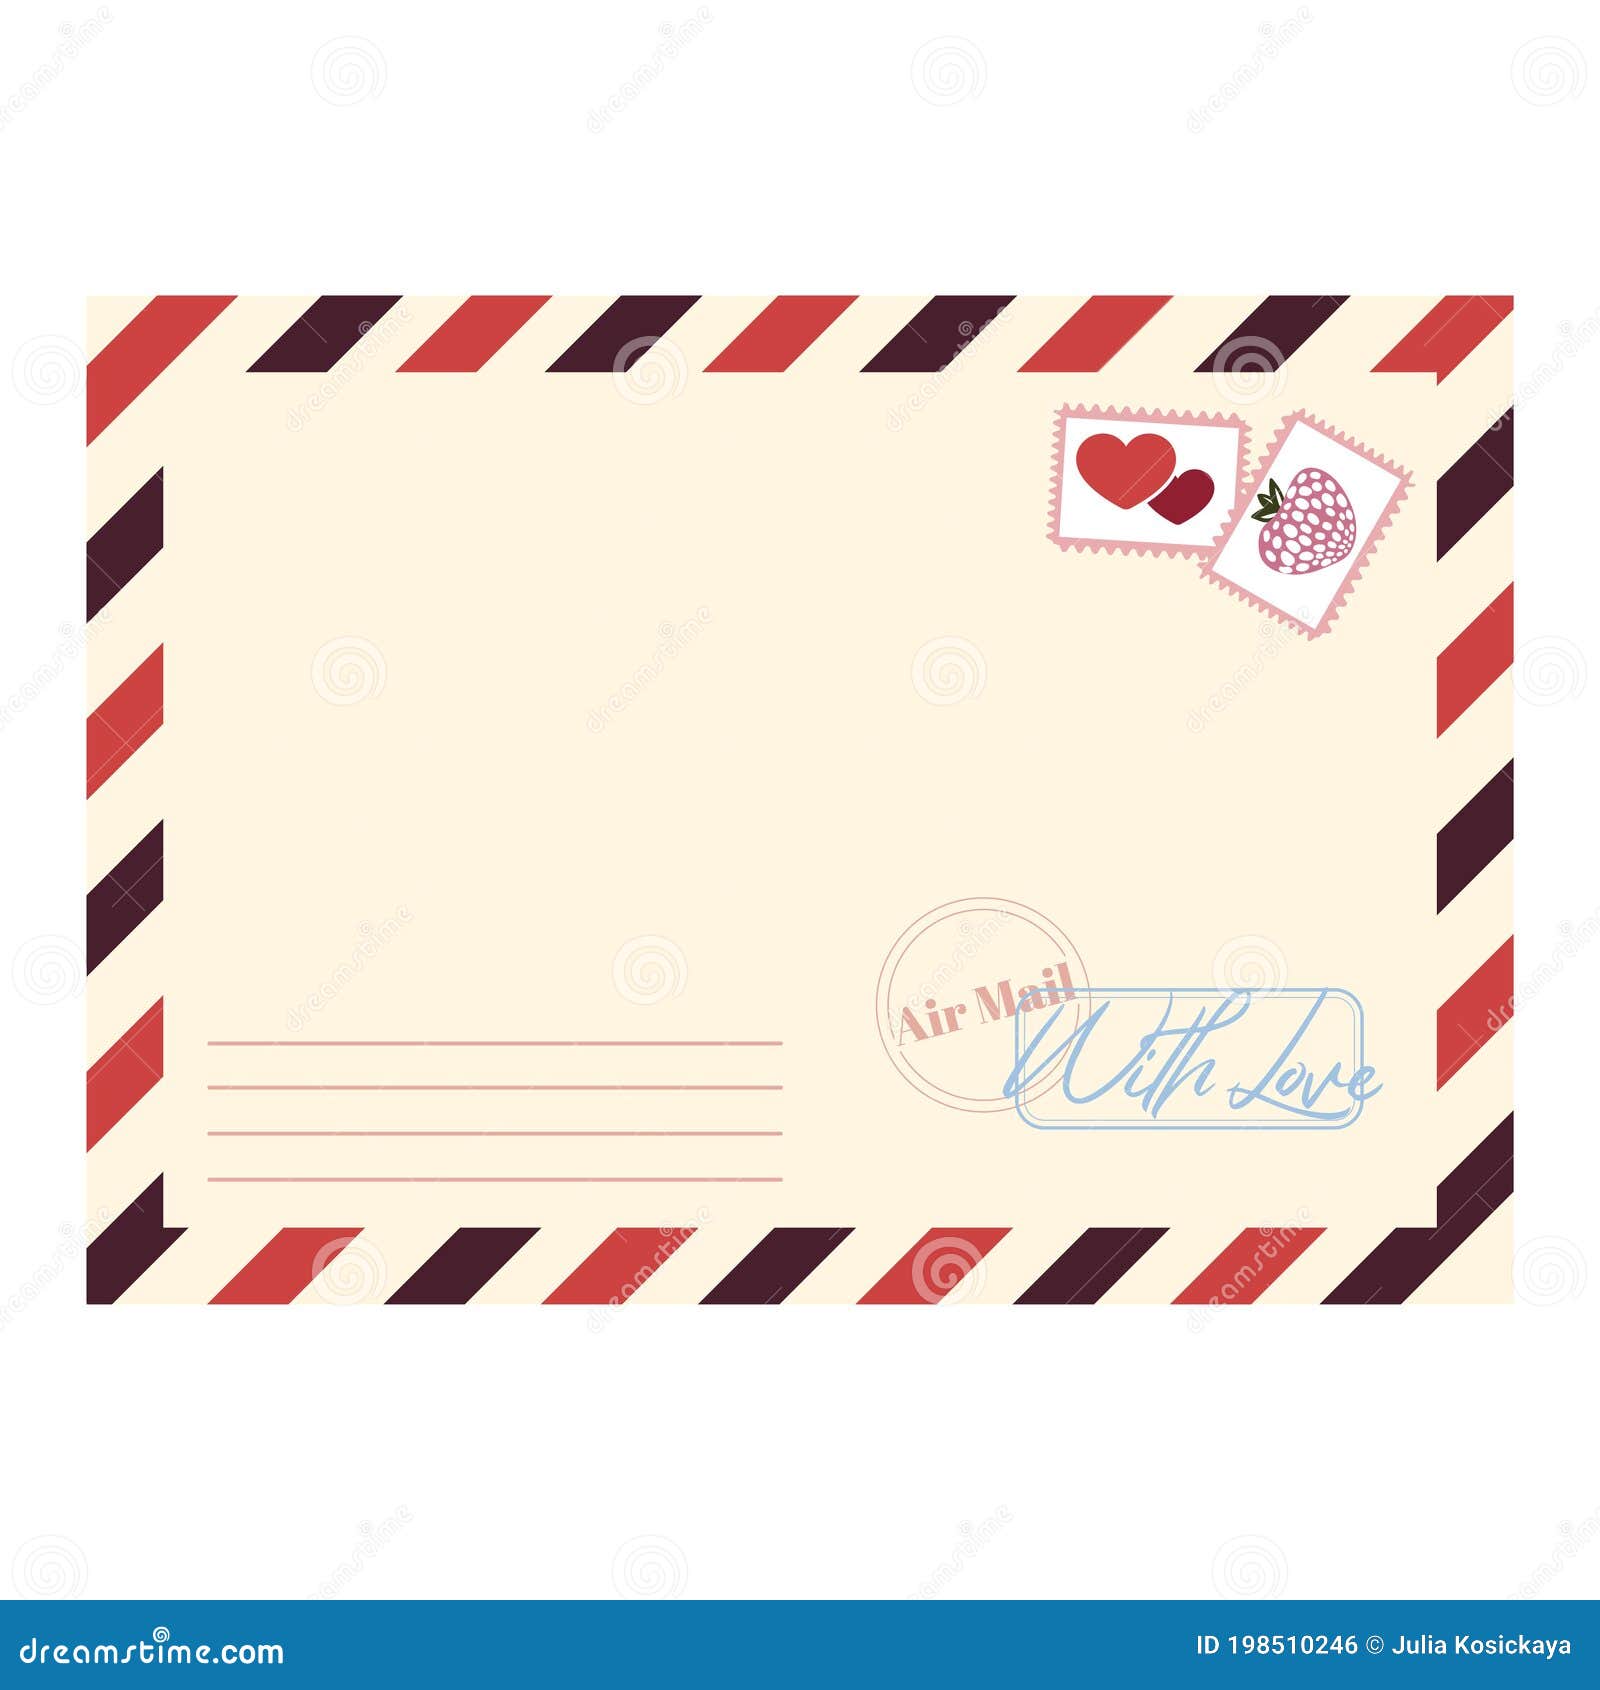 Colored Postage Stamp Templates - Mail Themed Clip Art Commercial Use